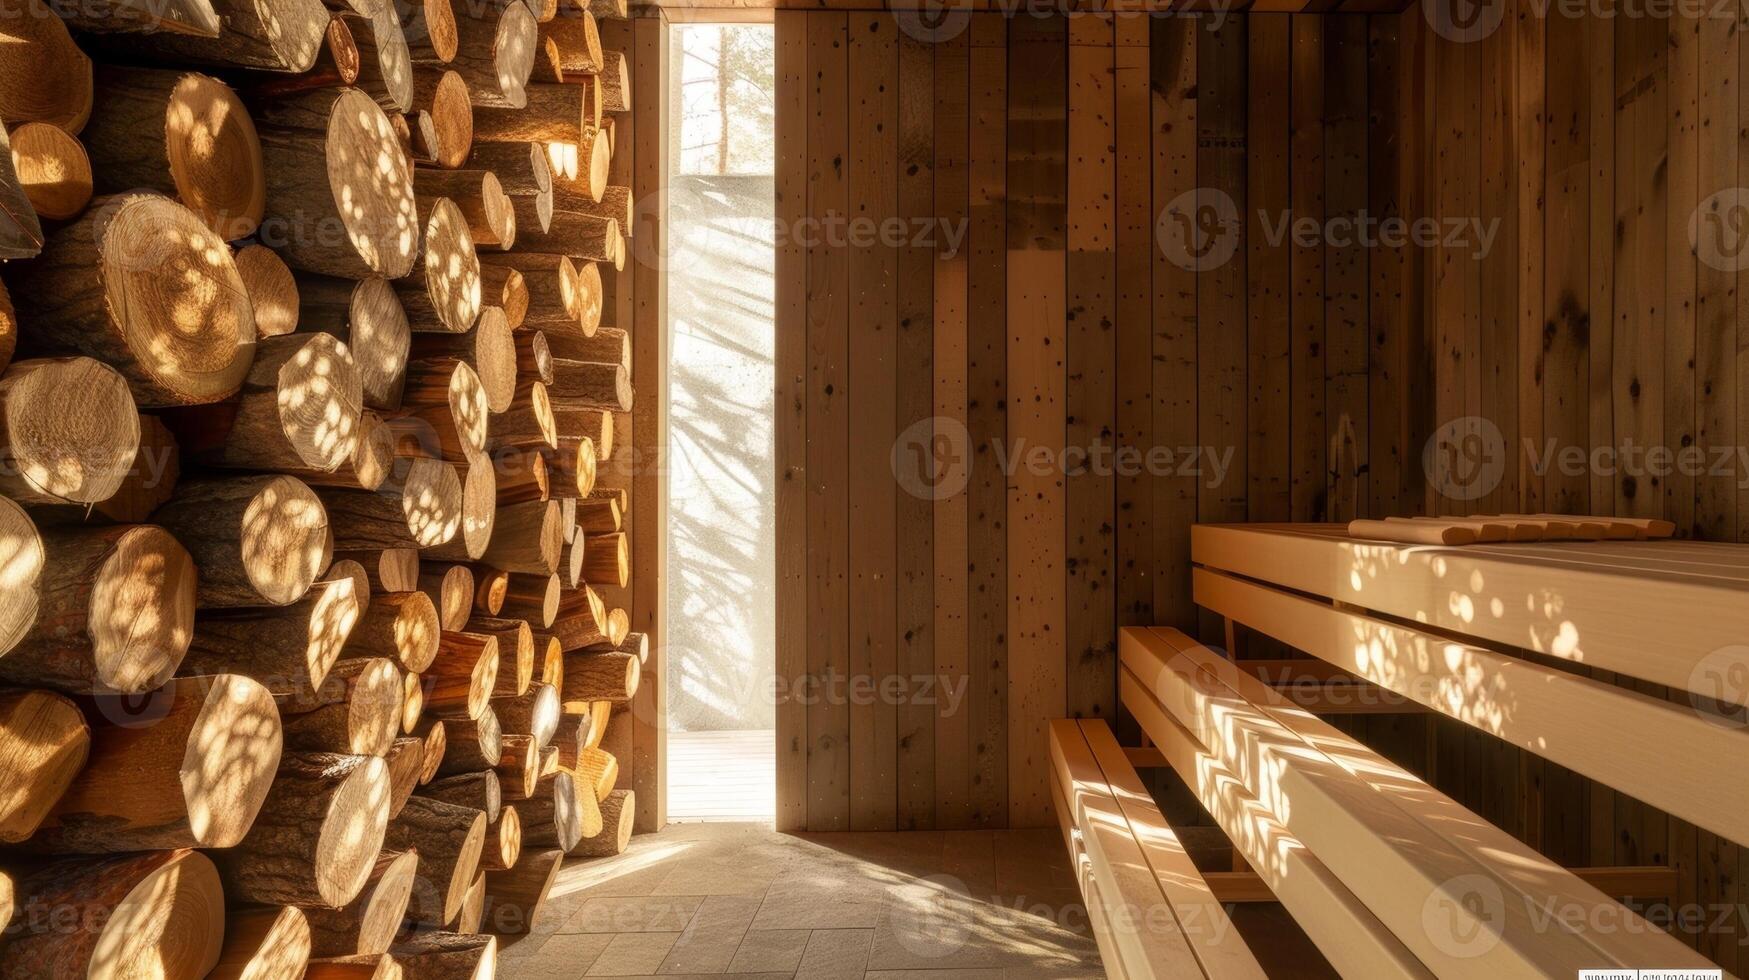 A woodfired sauna that sources its wood from sustainably managed forests promoting responsible and ecofriendly practices. photo